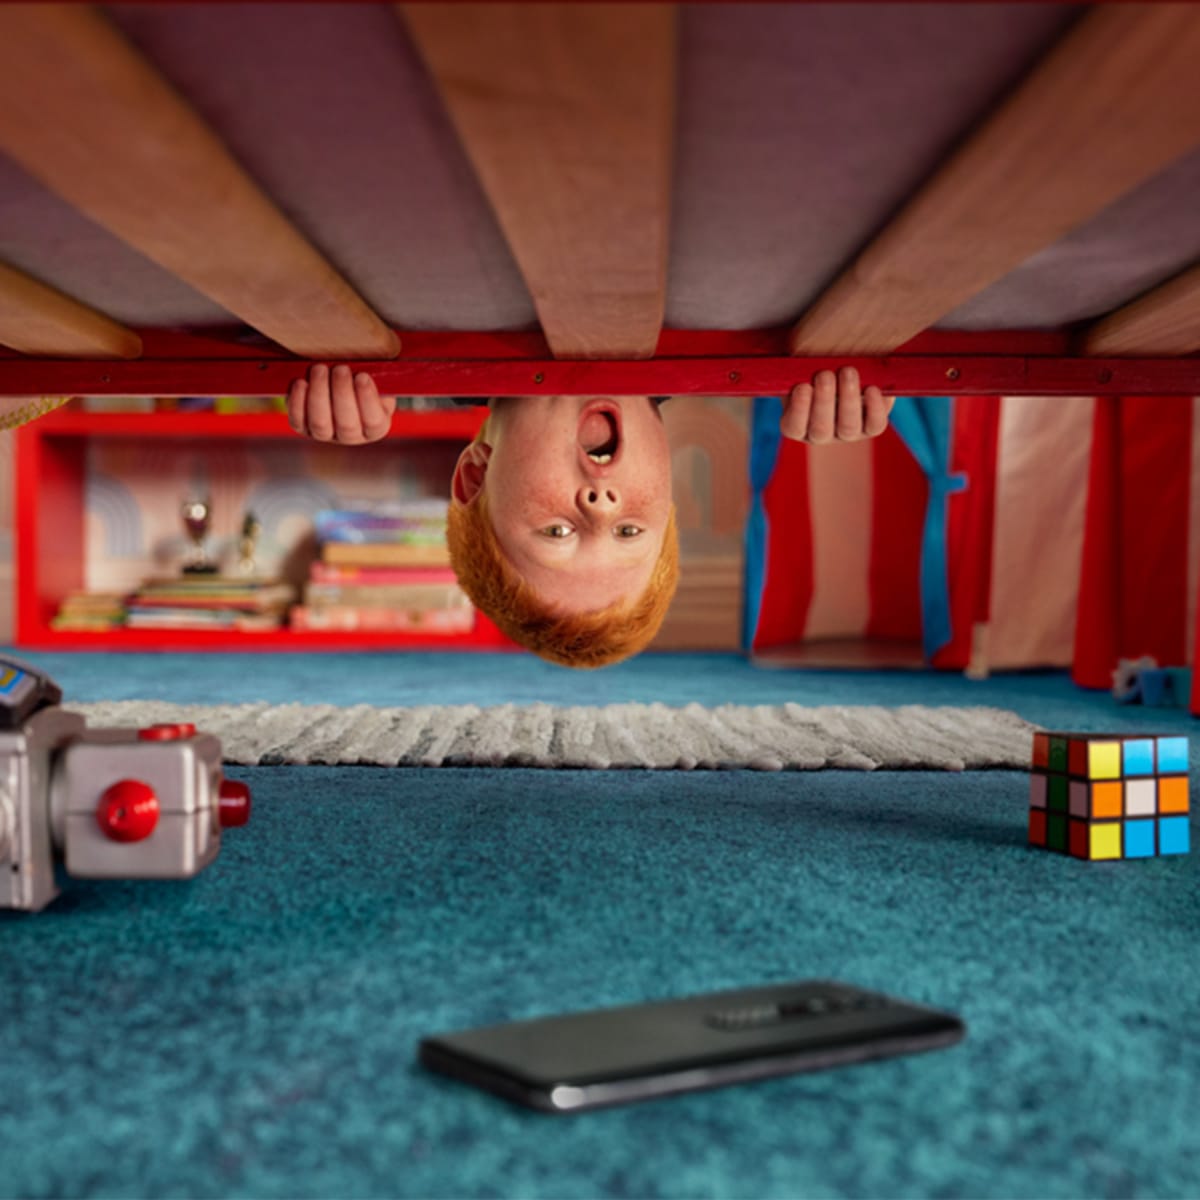 Vodafone - Home of Trade In. A young boy looks underneath his bed to find an old smart phone surrounded by old toys and books